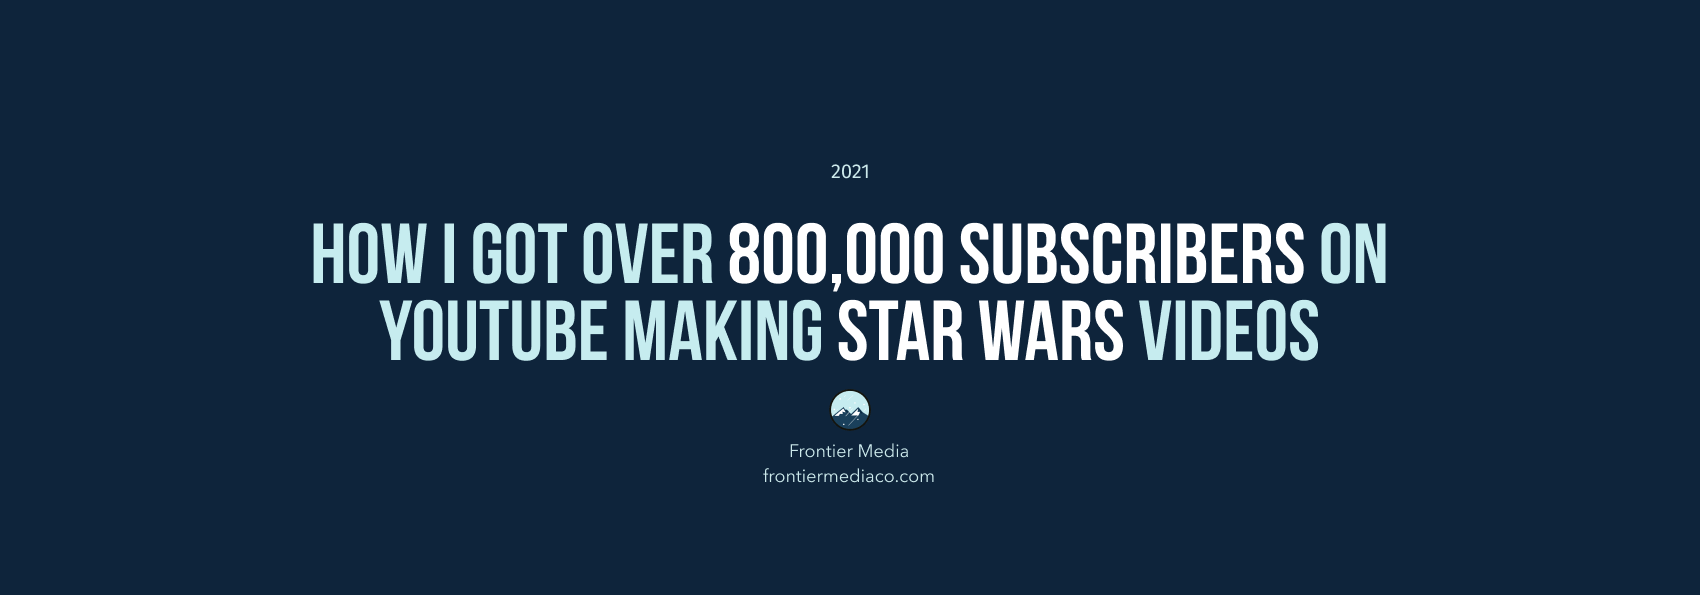 How I got over 800,000 Subscribers on Youtube Making Star Wars Videos